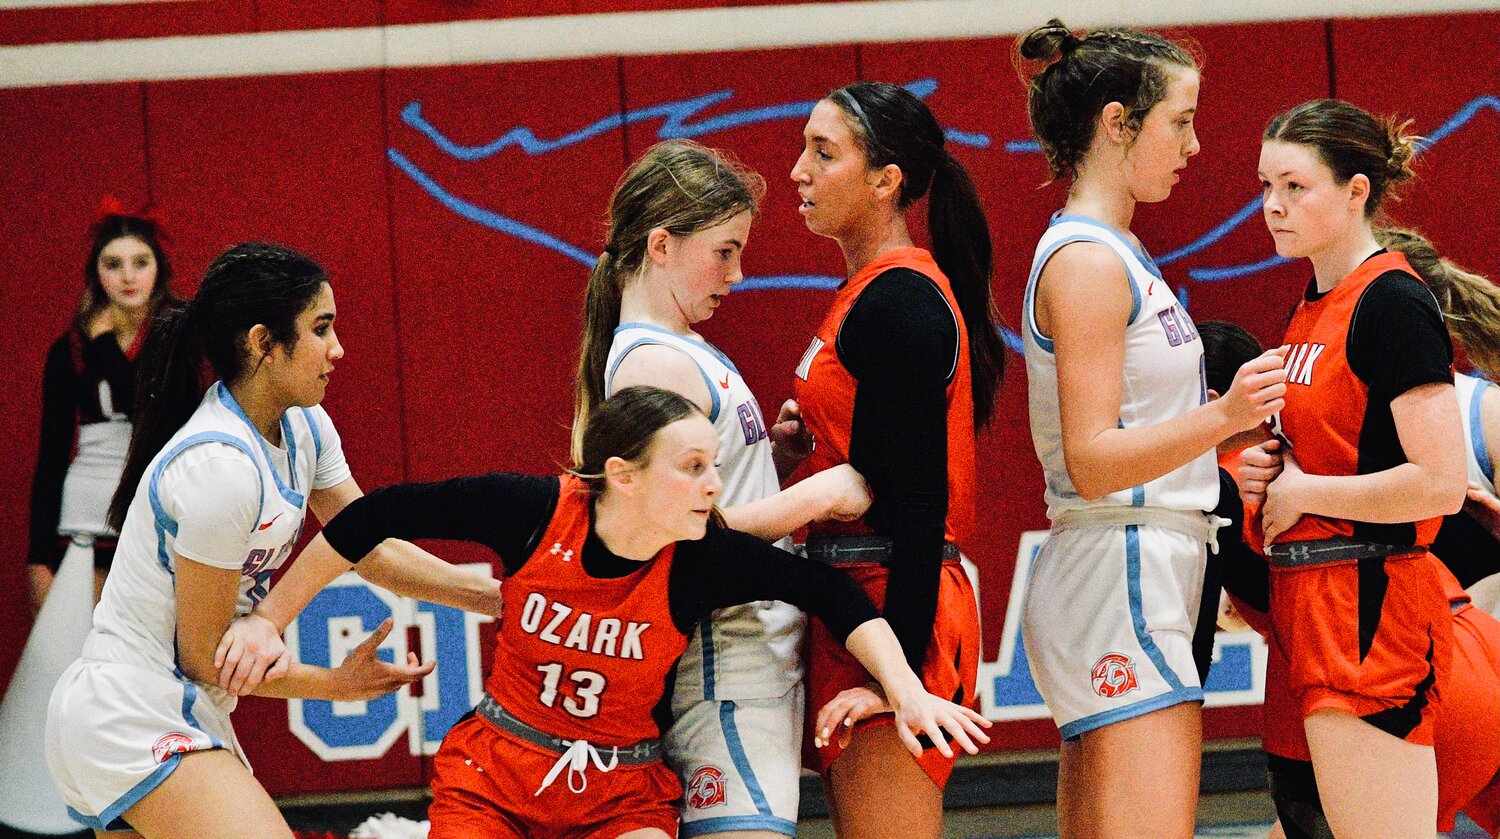 OZARK'S LYLA WOOD breaks from a pack of players.